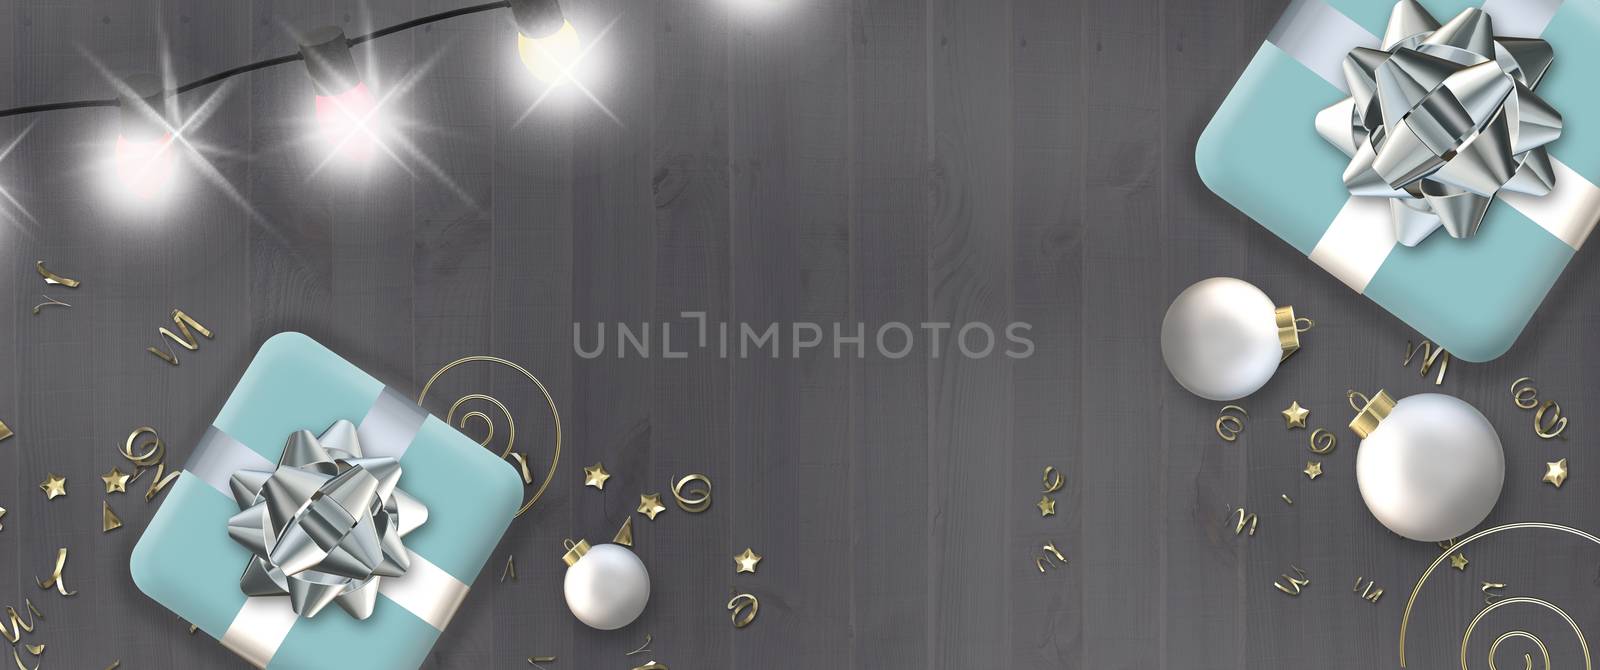 Christmas holiday ornament of dark wooden background with snow. Blue Xmas gift boxes, Xmas balls, lights over dark wood. Flat lay, top view. Text Merry Christmas Happy New Year. 3D render